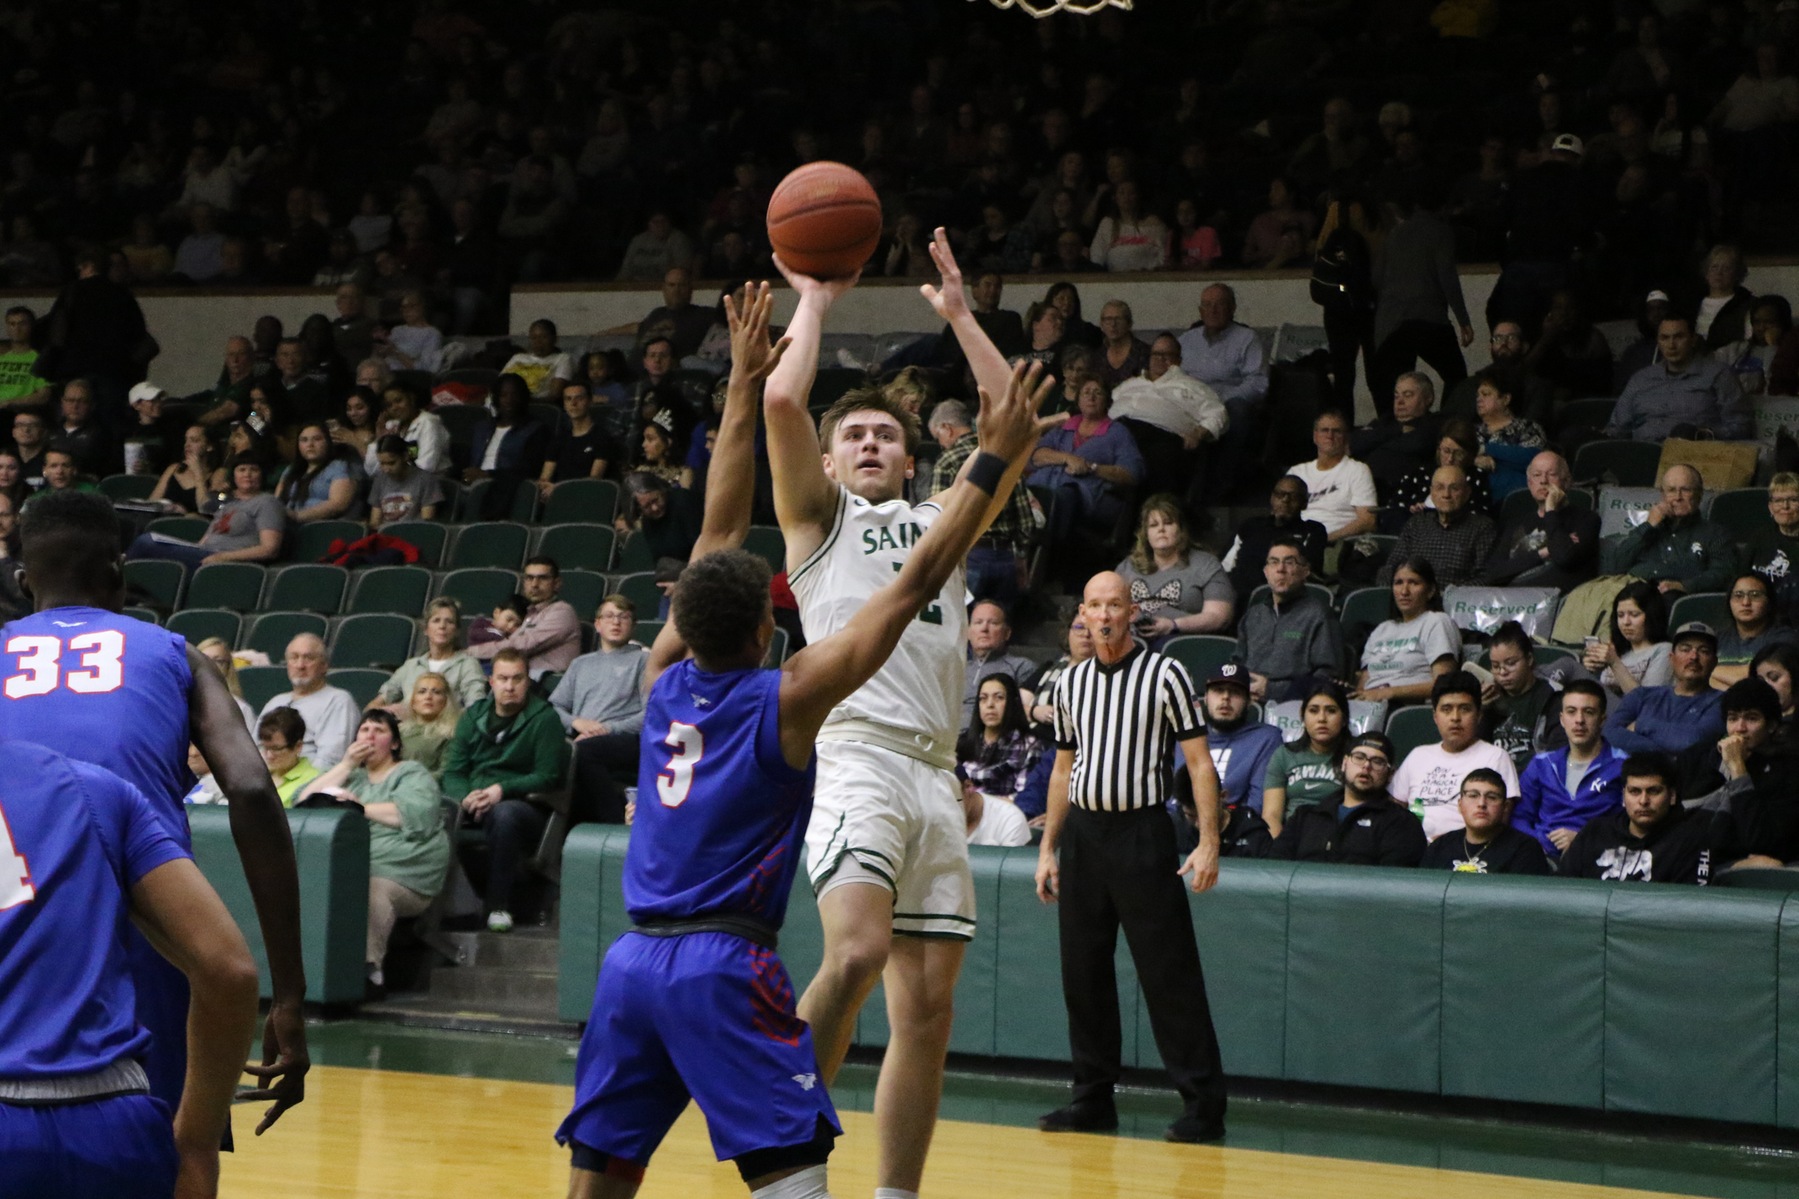 Saints lose back and forth affair 68-67